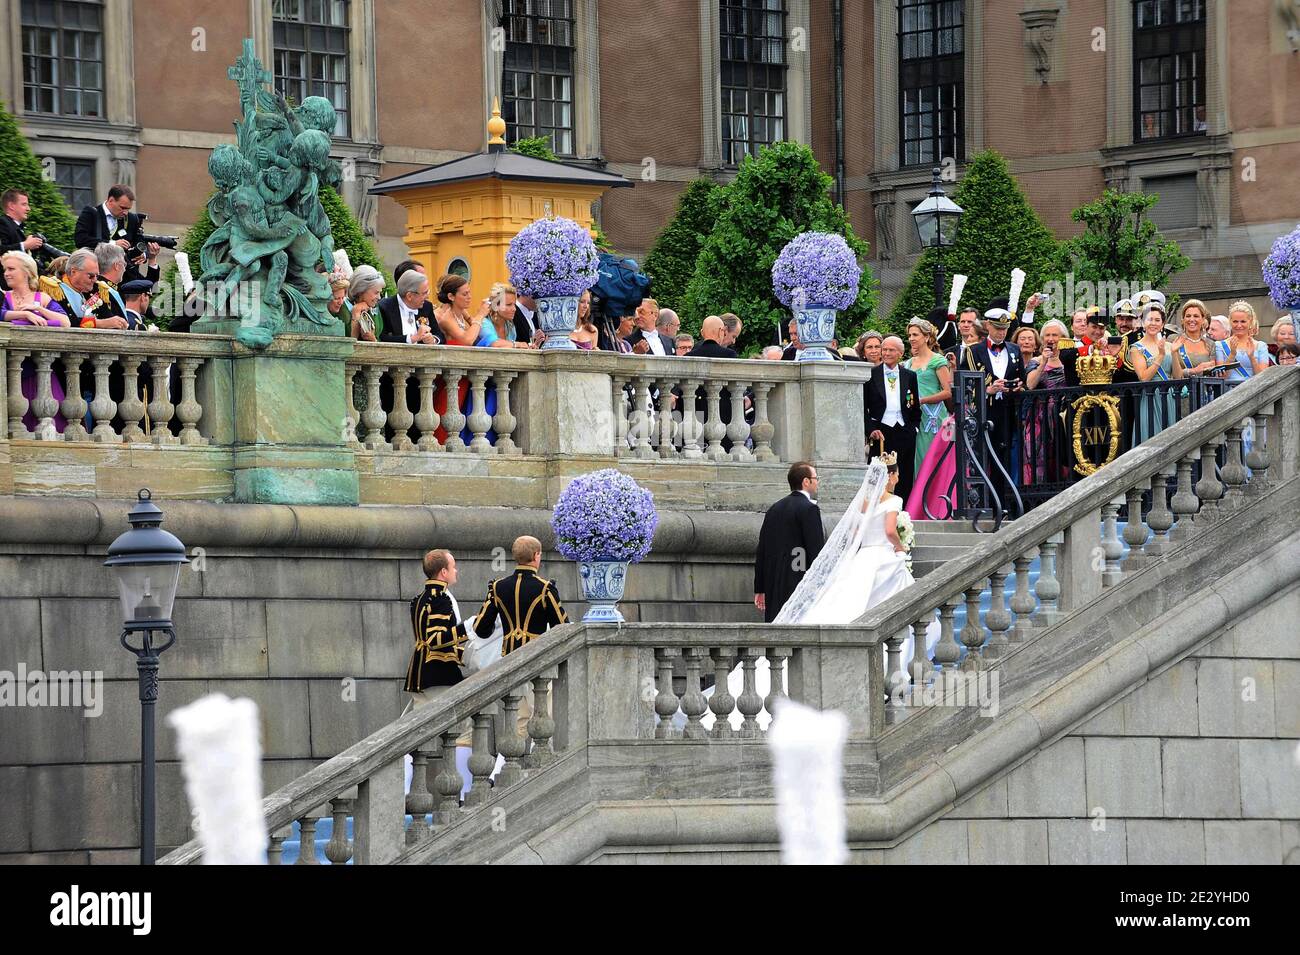 Crown Princess Victoria of Sweden and Daniel Westling come back at Royal Palace during the ceremony of their wedding in Stockholm, Sweden on June 19, 2010. Photo by Mousse-Nebinger-Orban/ABACAPRESS.COM Stock Photo